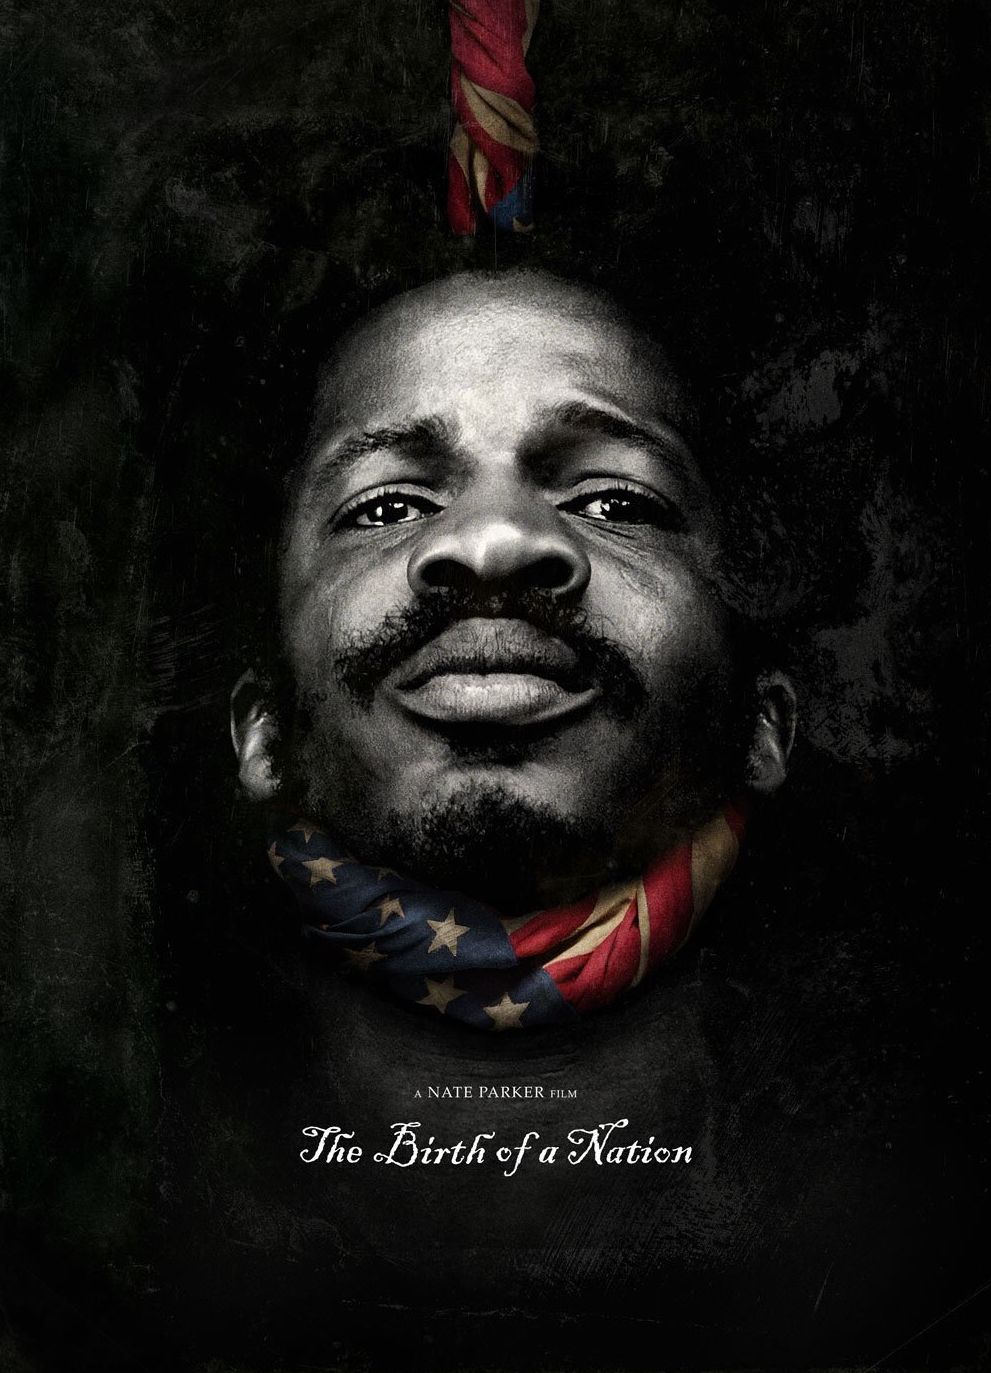 A bleak new poster for Nate Parker's 'The Birth of a Nation'